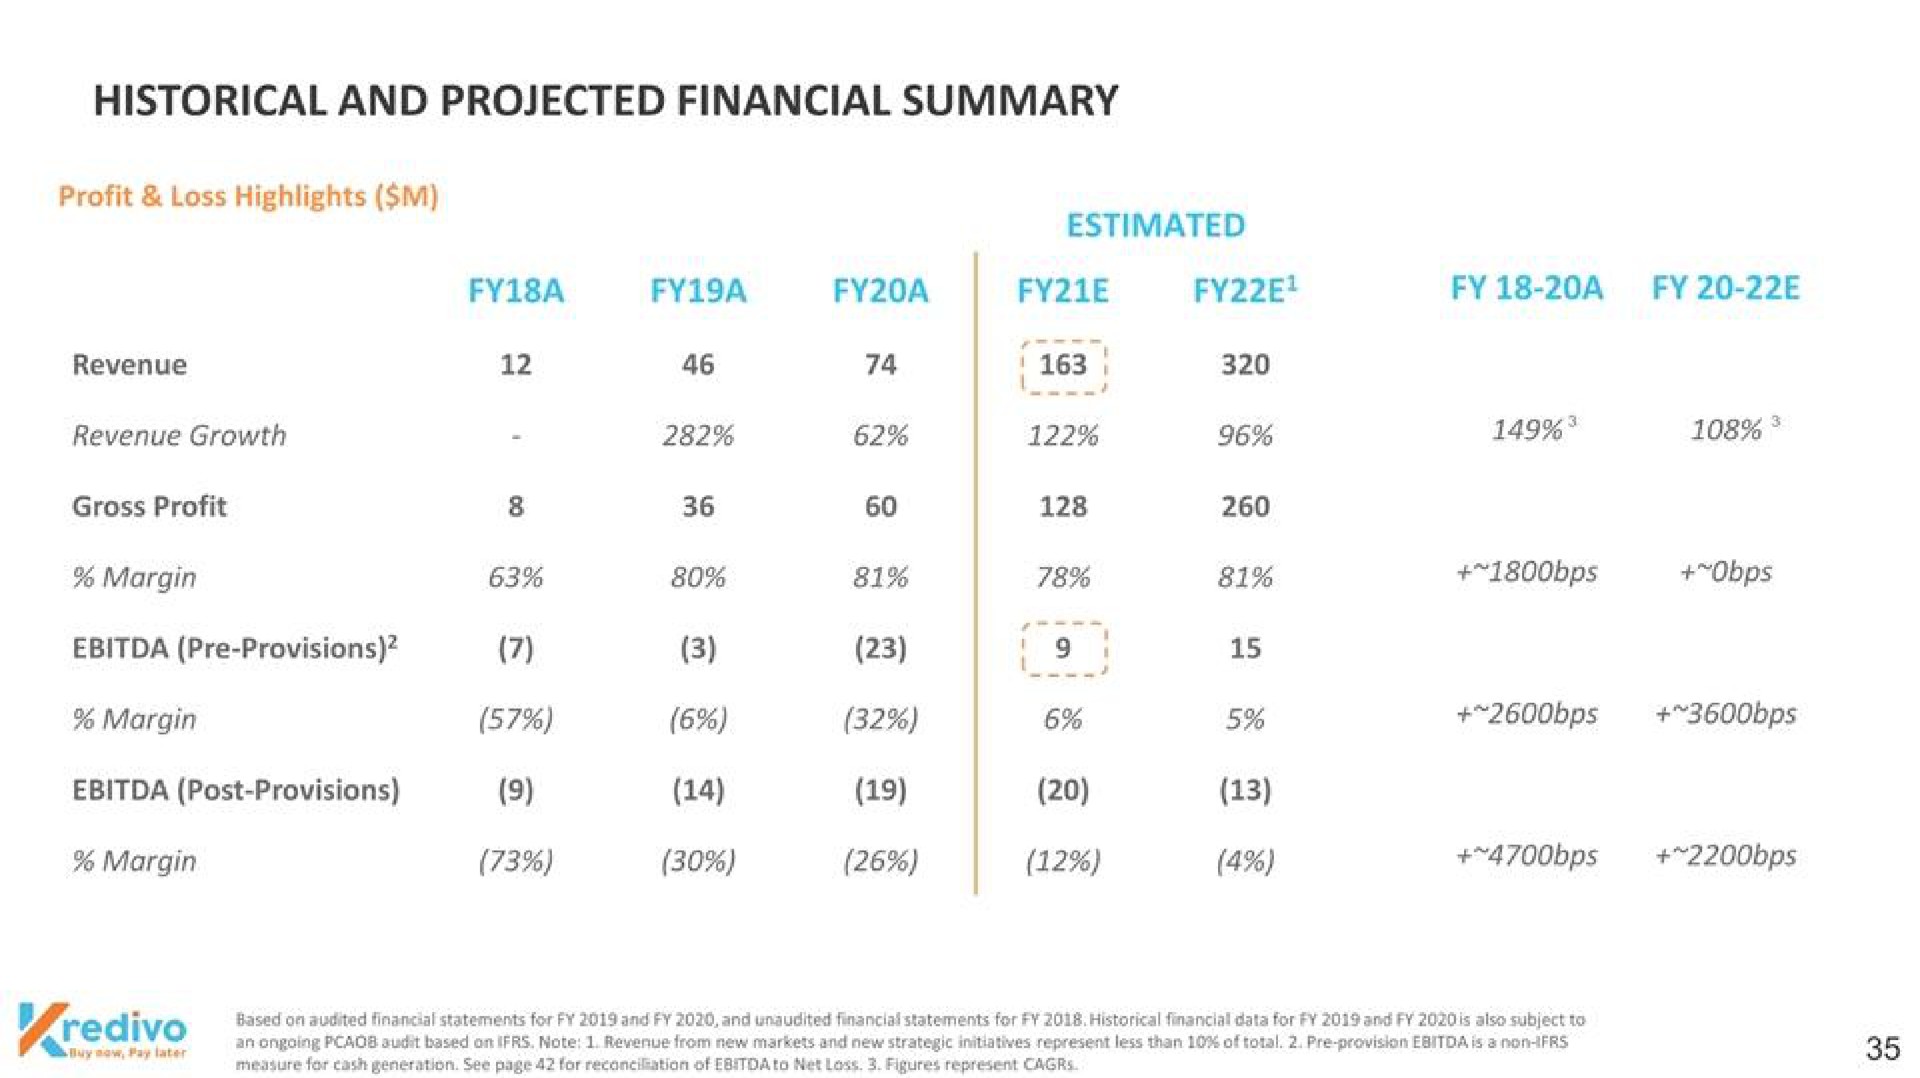 historical and projected financial summary revenue provisions | Kredivo